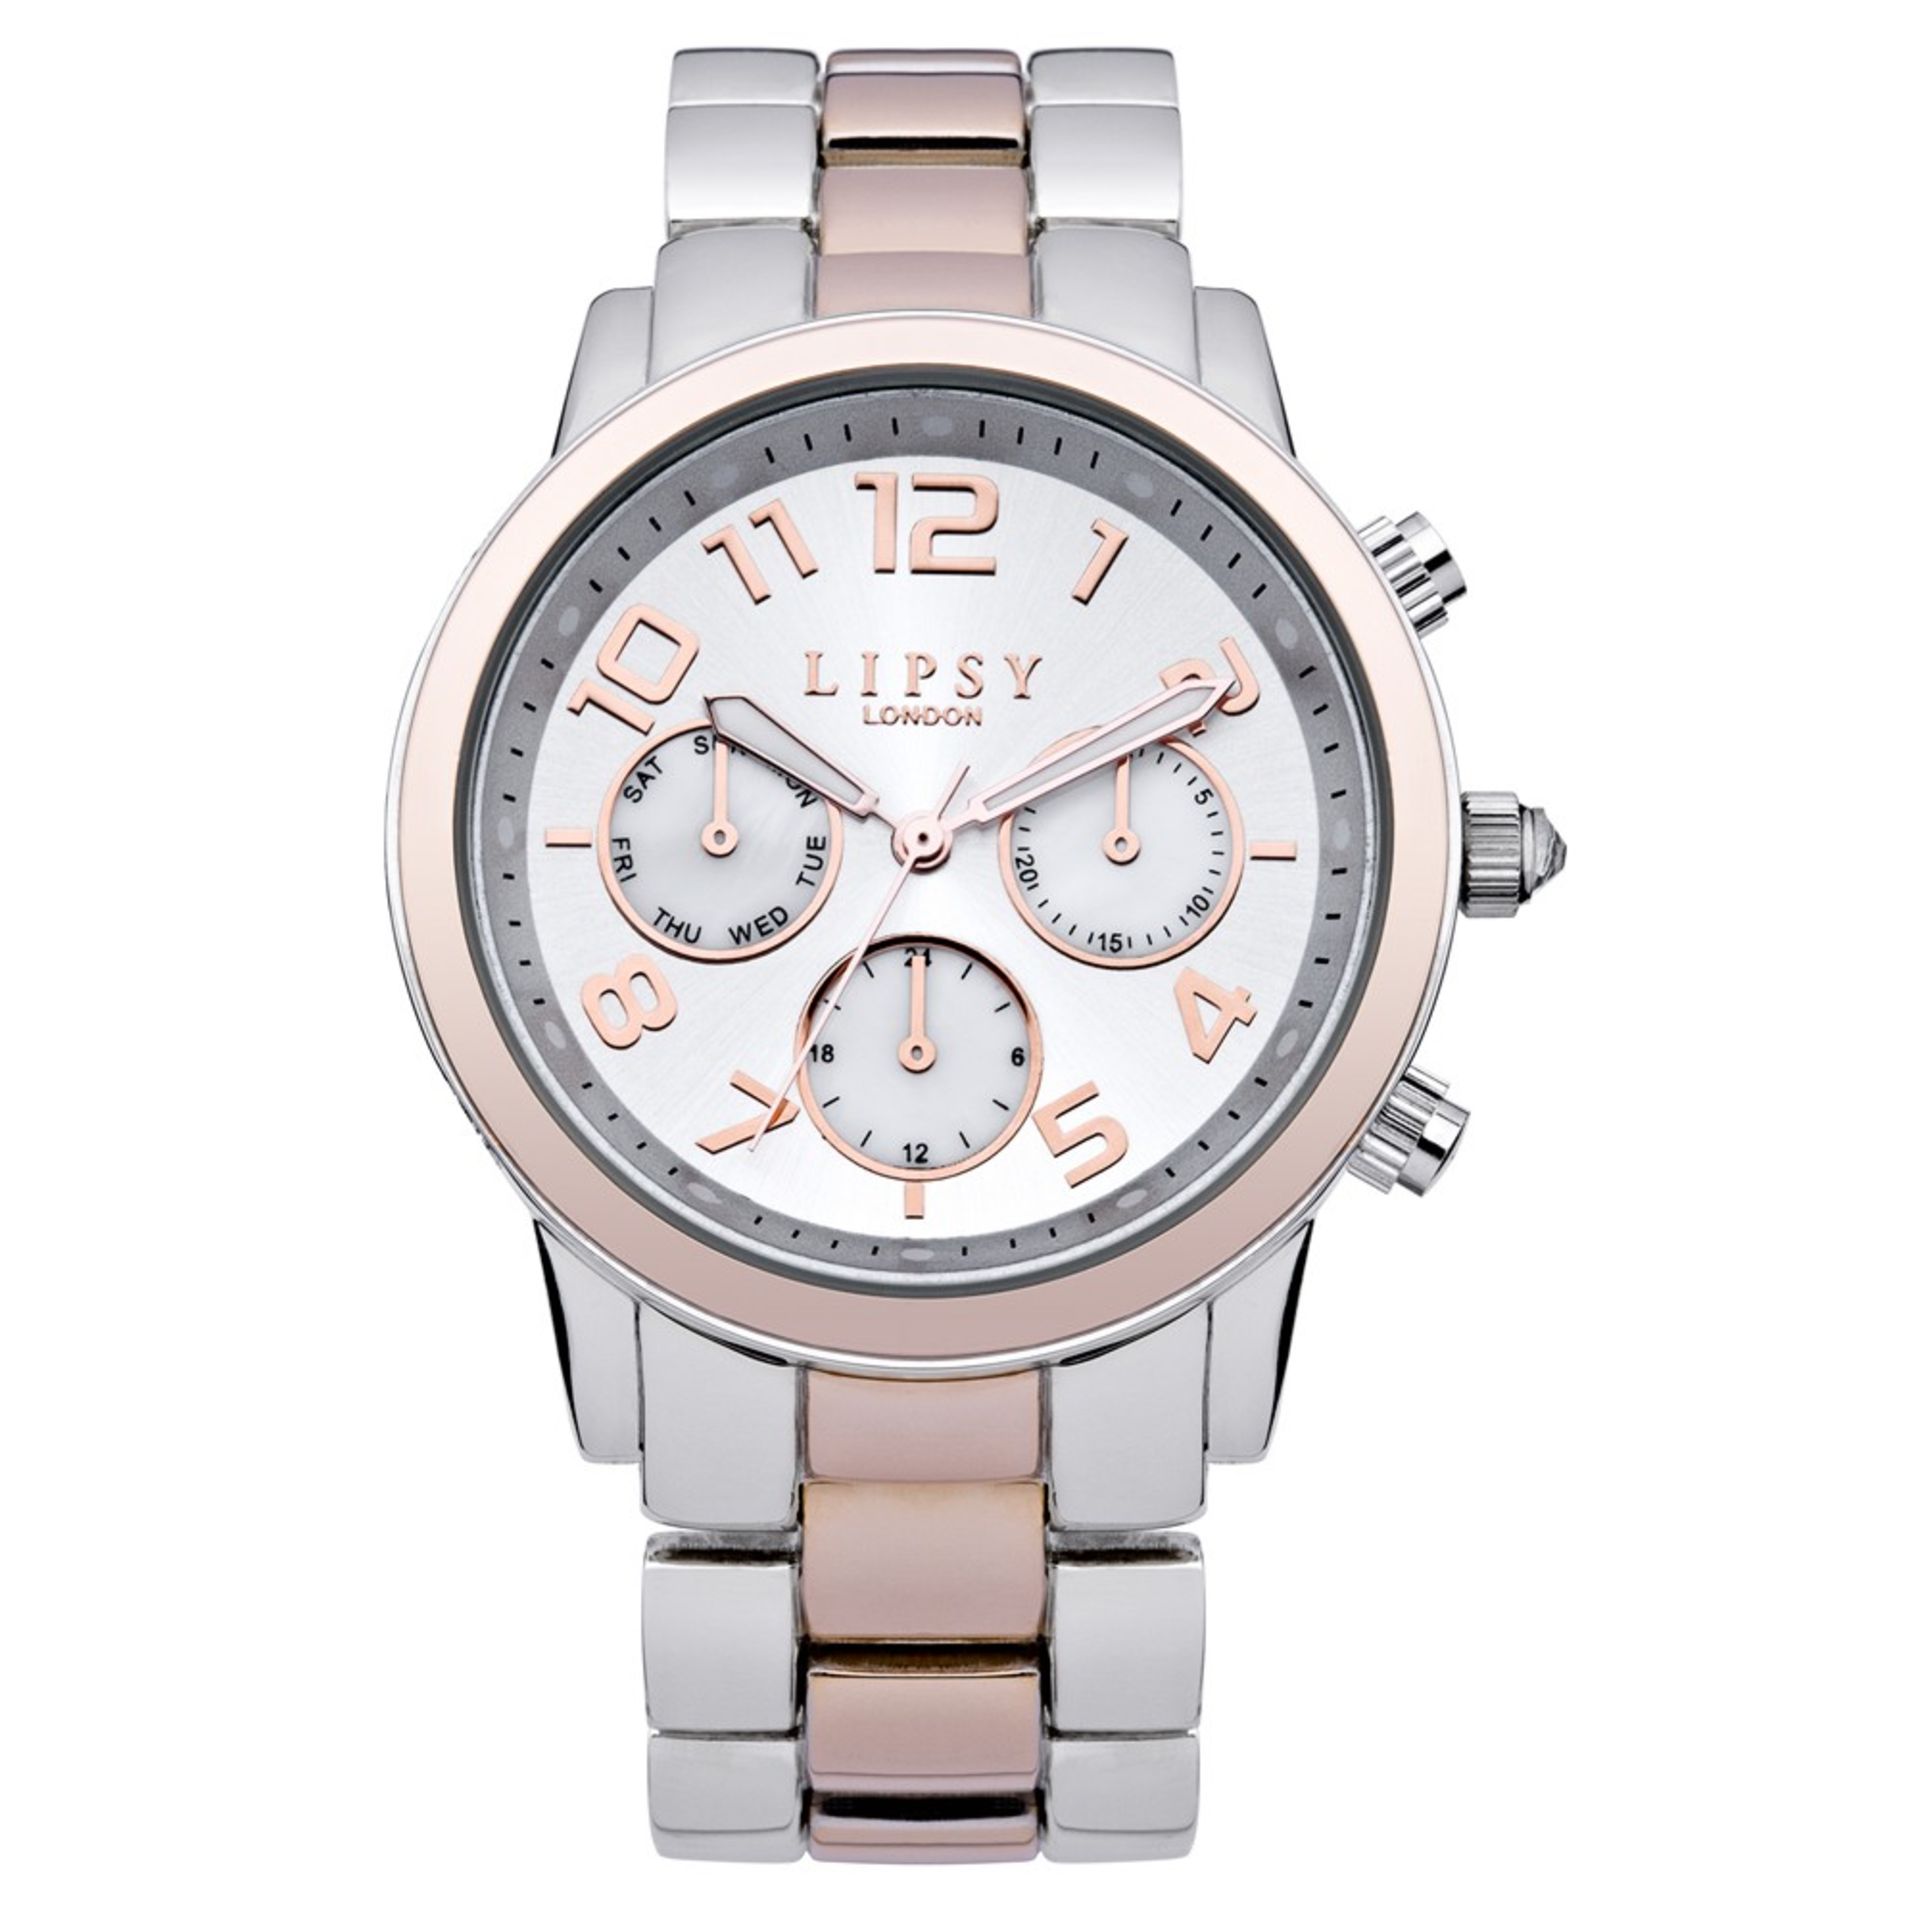 Boxed Brand New, LIPSY KADIES SILVER/ROSE GOLD COLOURED BRACELET WATCH WITH SILVER COLOURED DIAL,